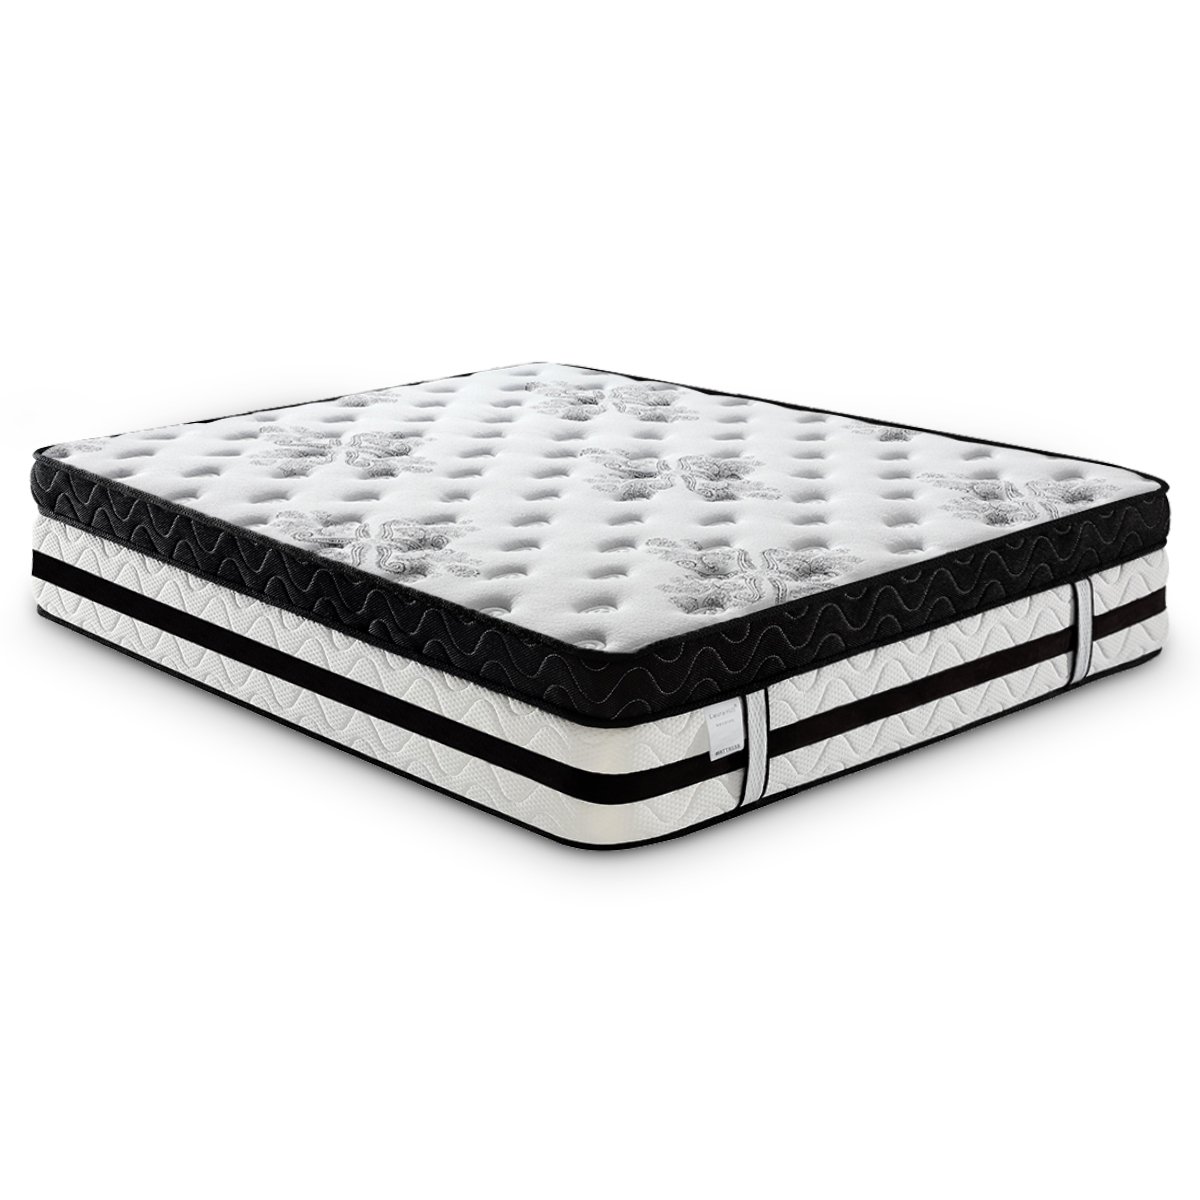 Laura Hill King Mattress with Euro Top - 34cm 2